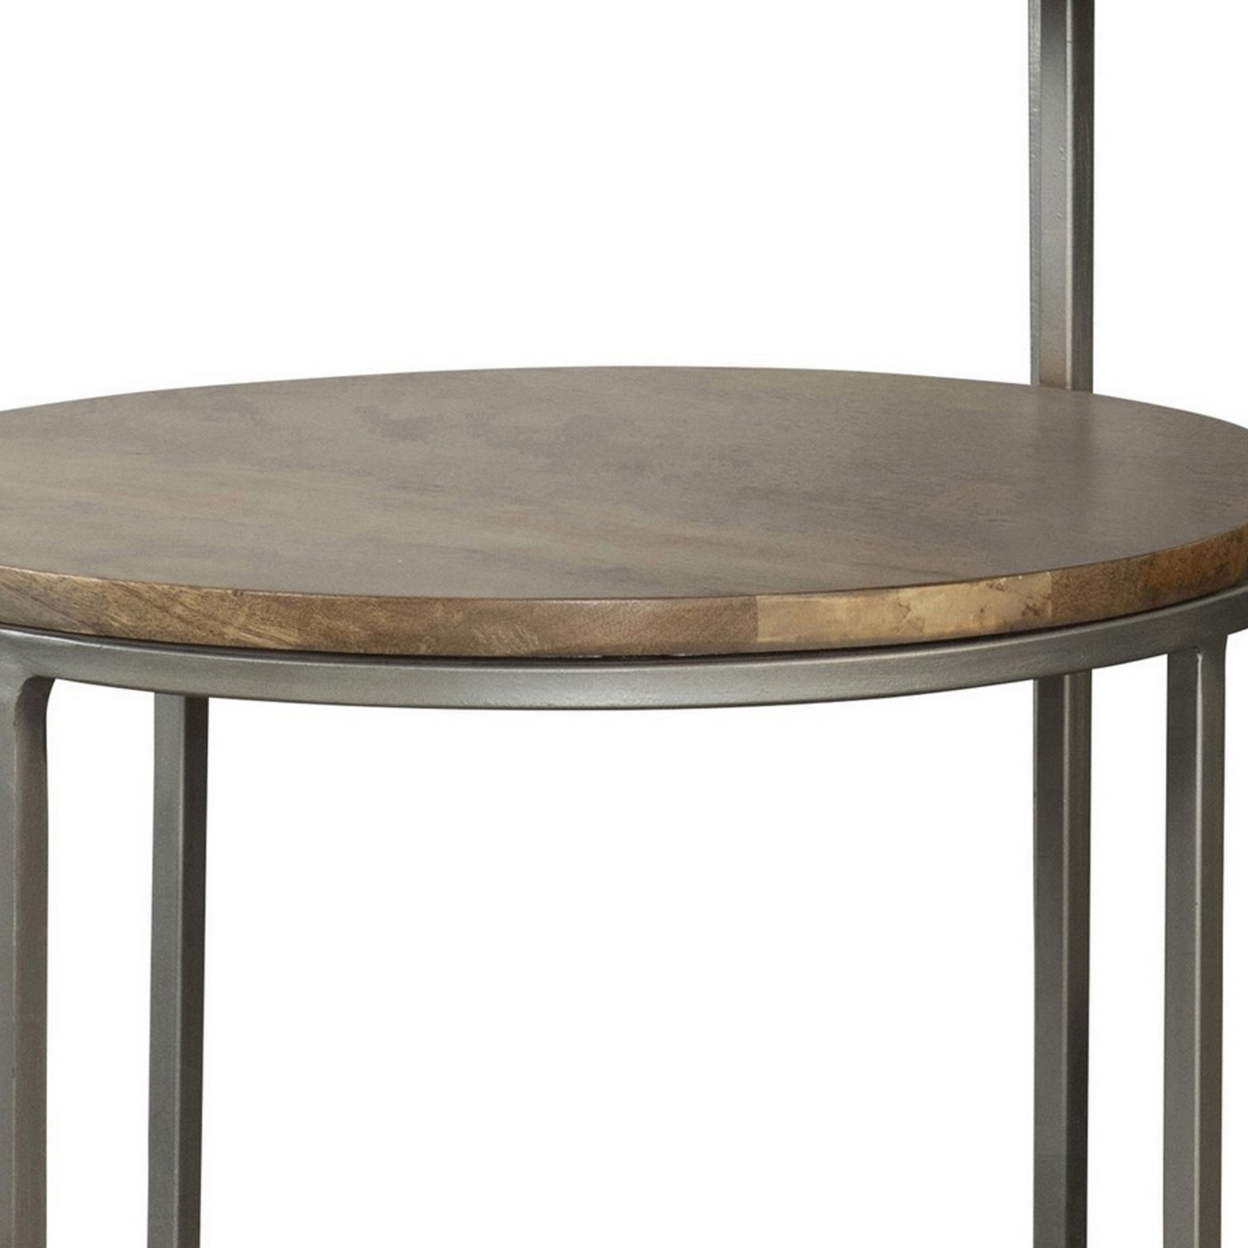 29 Inch Modern Round Accent Table, 2 Tier Brown Wood Tops, Gray Metal Base- Saltoro Sherpi